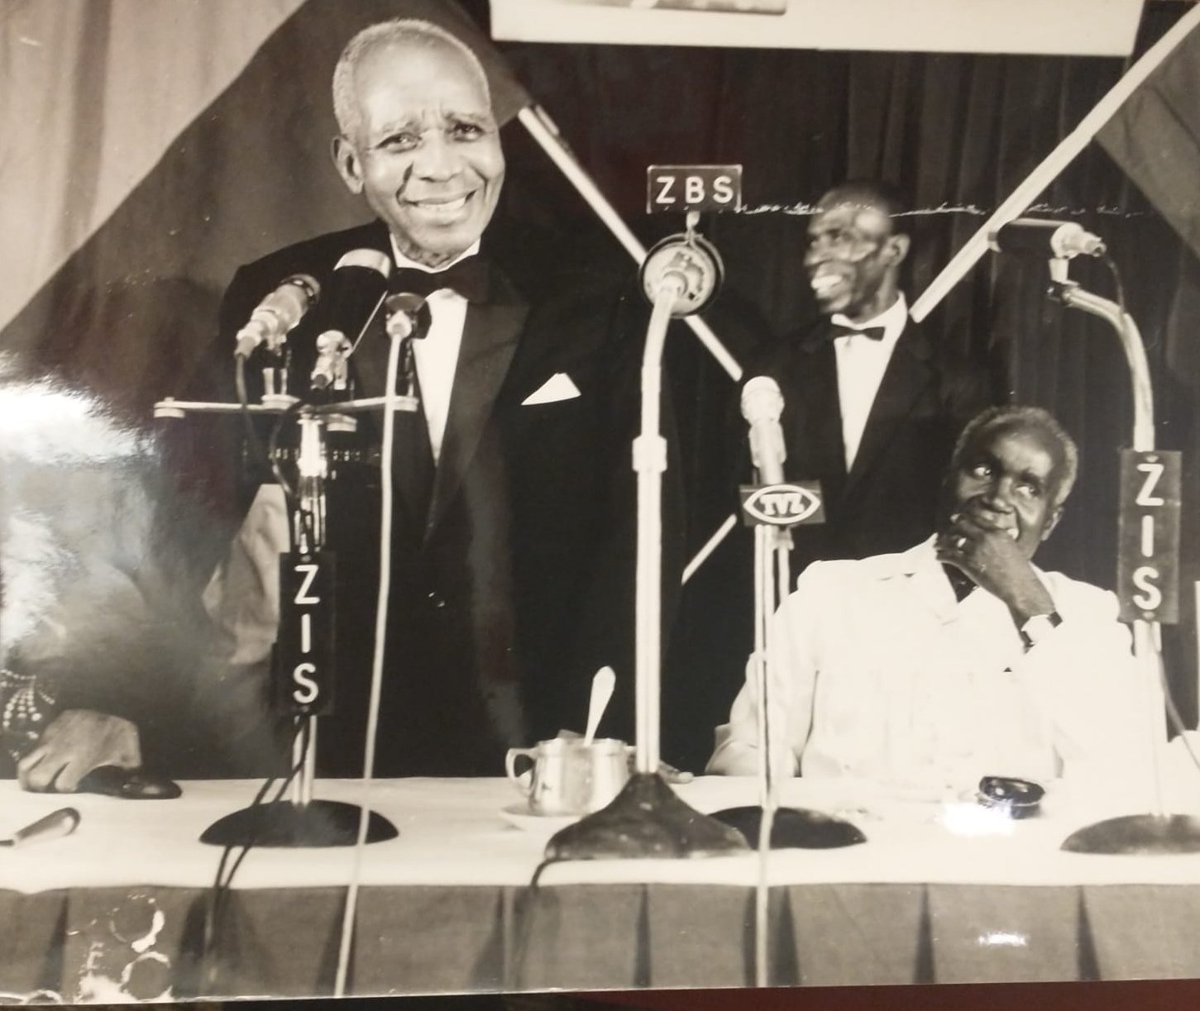 Kaunda's facial expression here is very much how I'd imagine him reacting when listening to Banda speak.